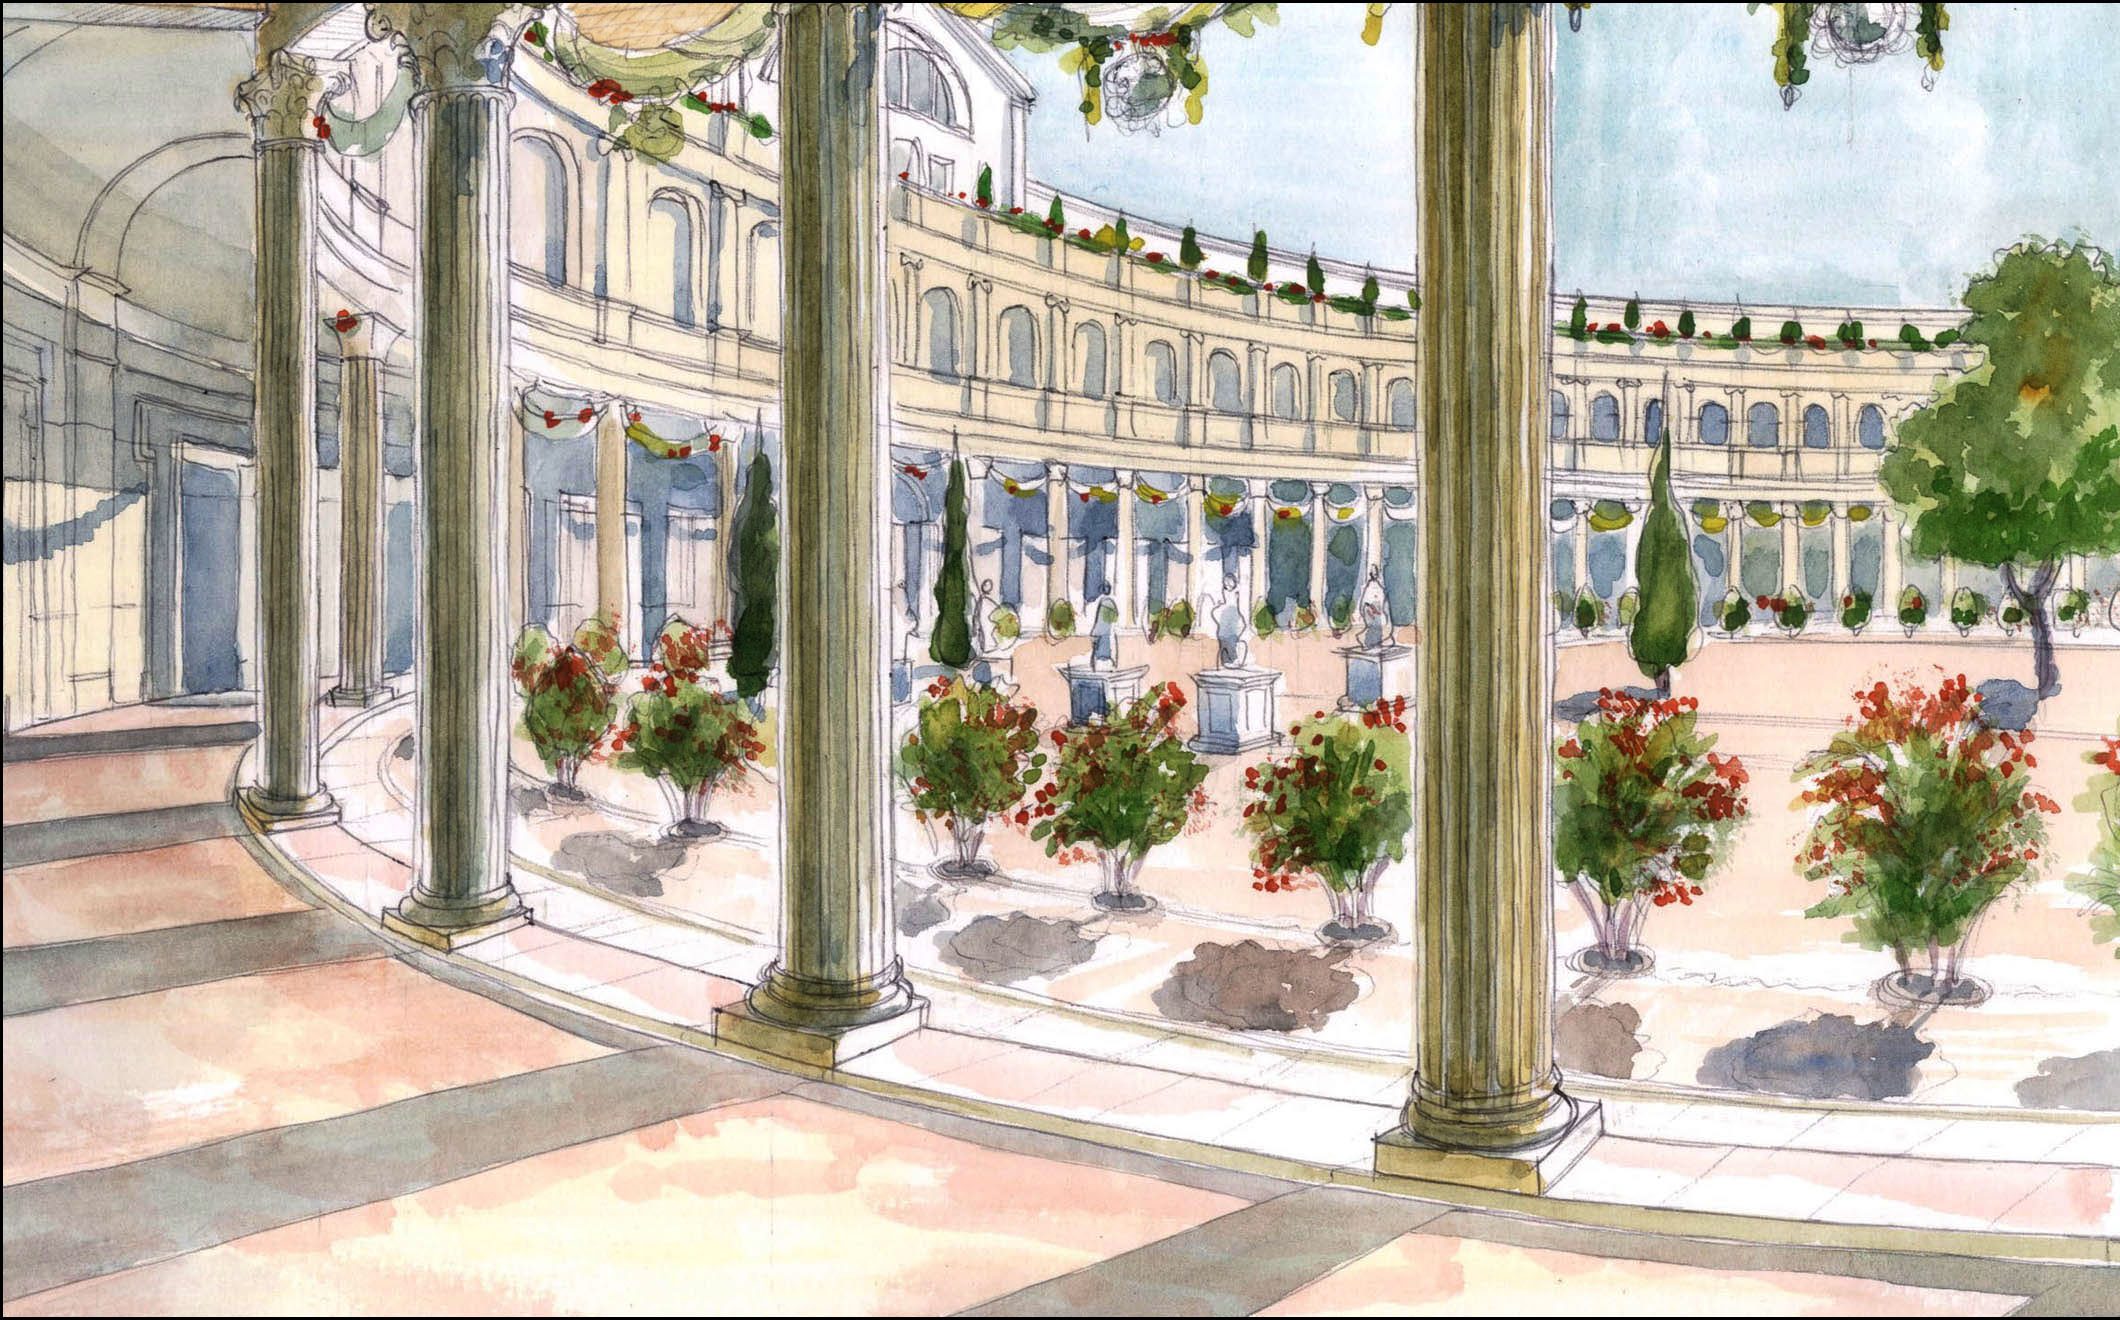 Reconstruction of the Flavian Palace